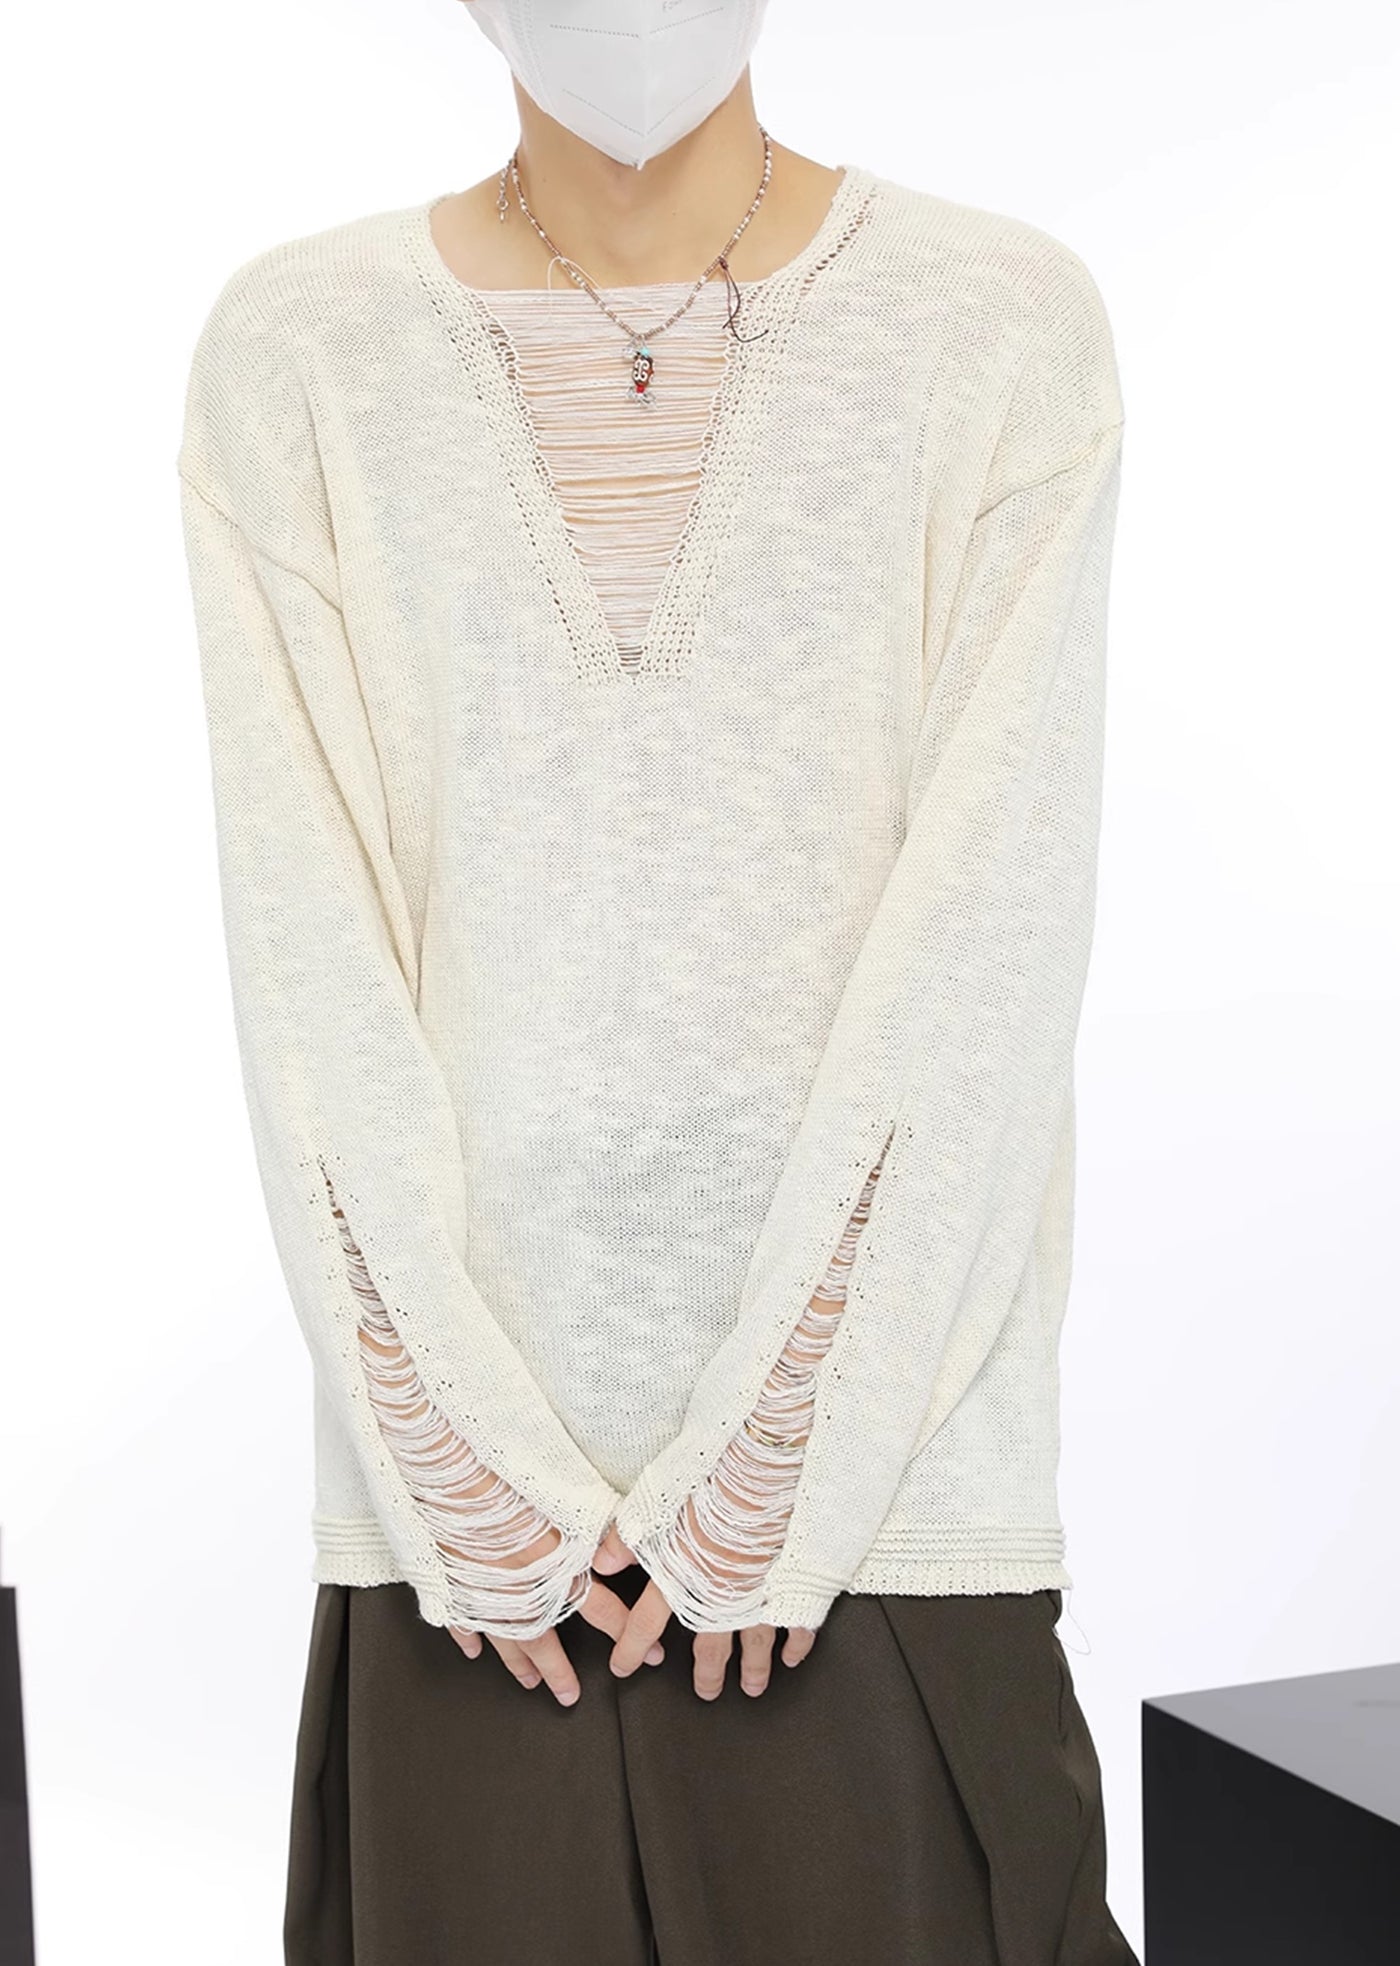 【Future Boy】Point mid-length frayed distressed loose style knit sweater  FB0004